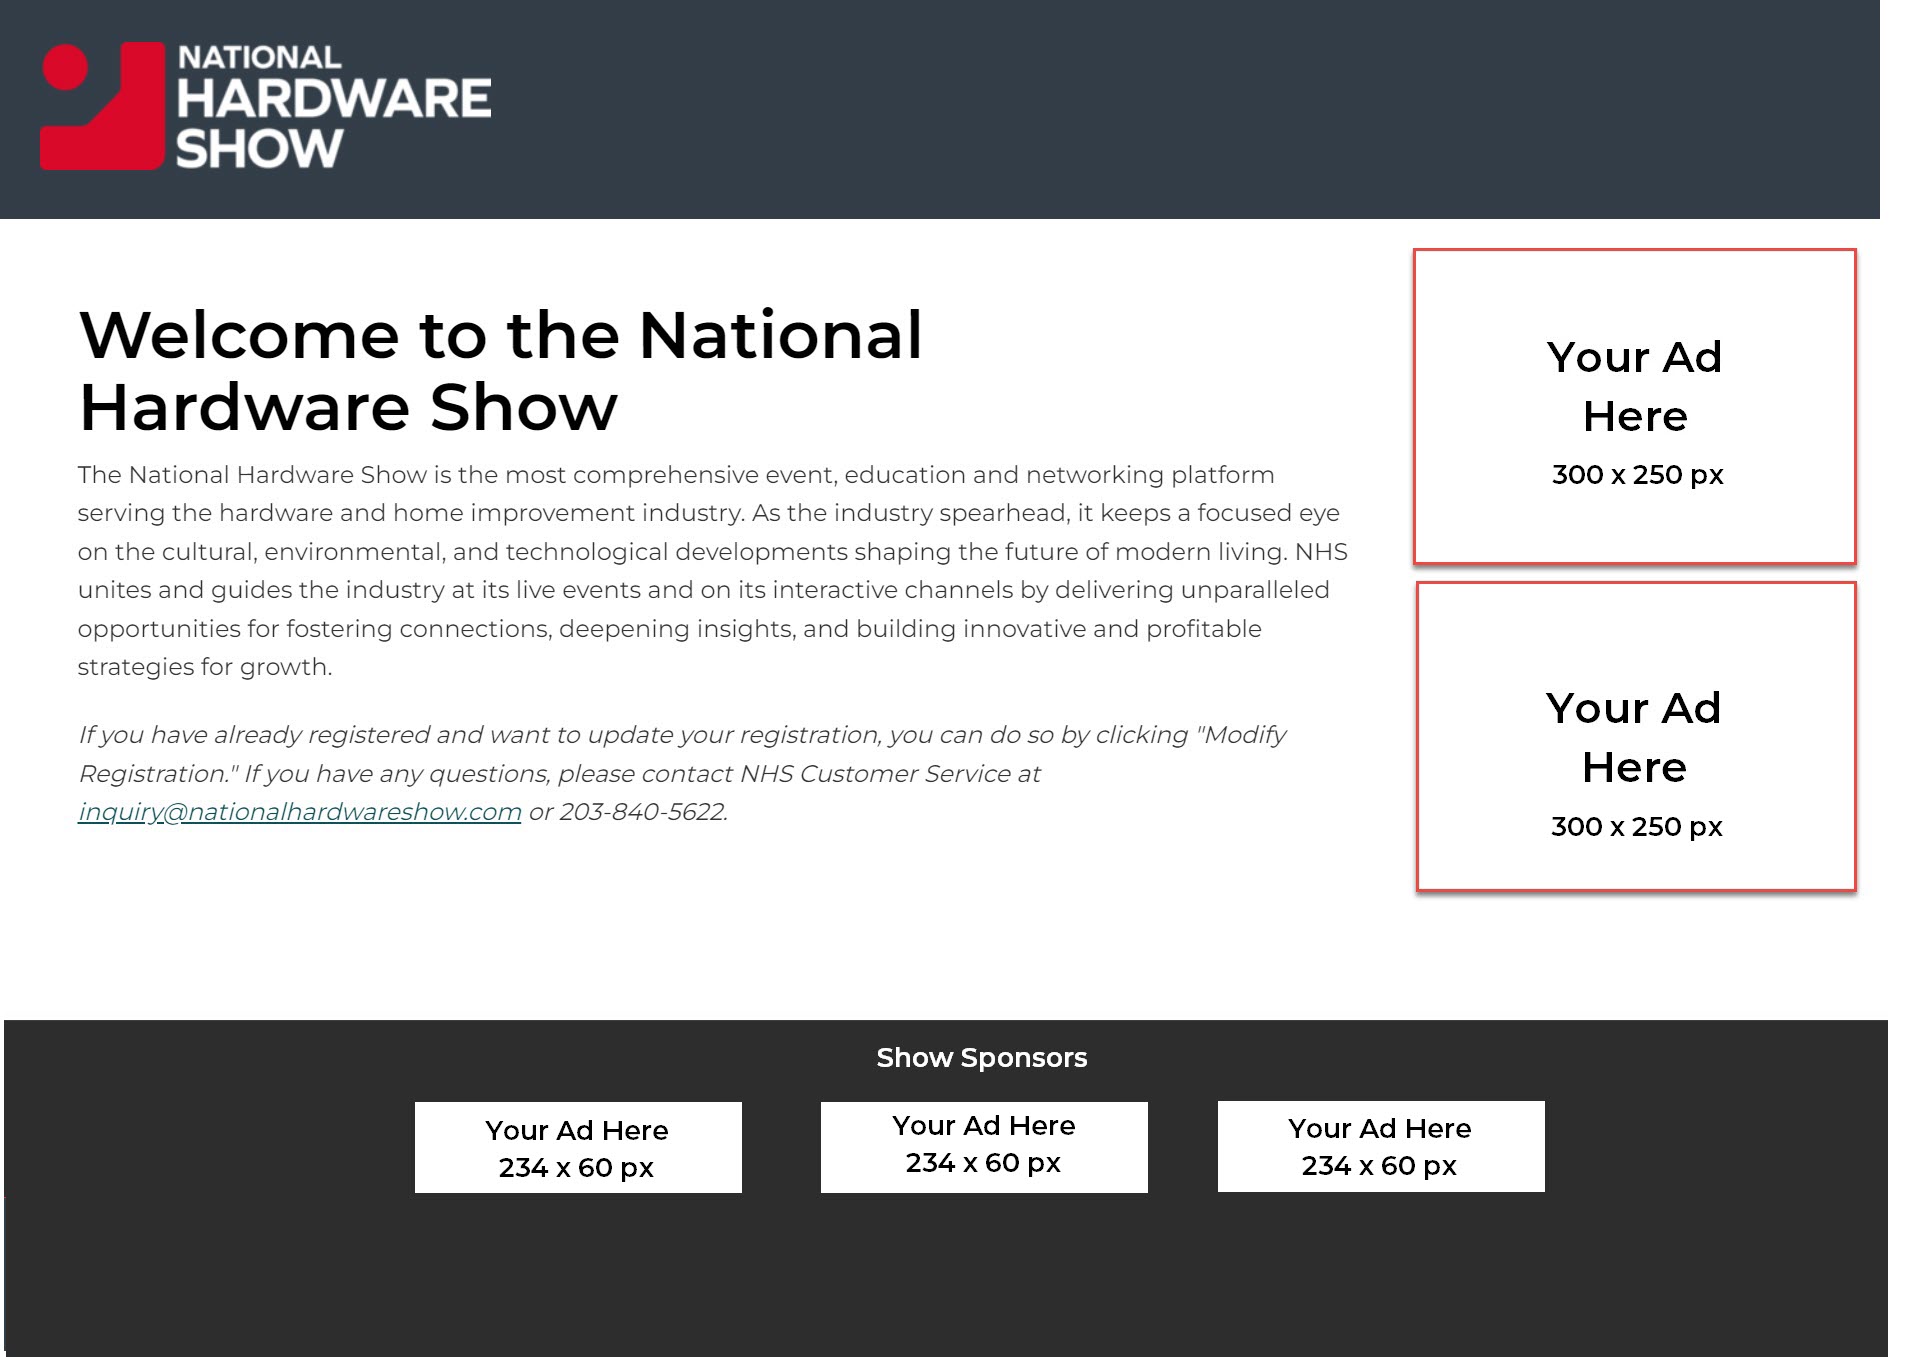 National Hardware Show on X: The National Hardware Show